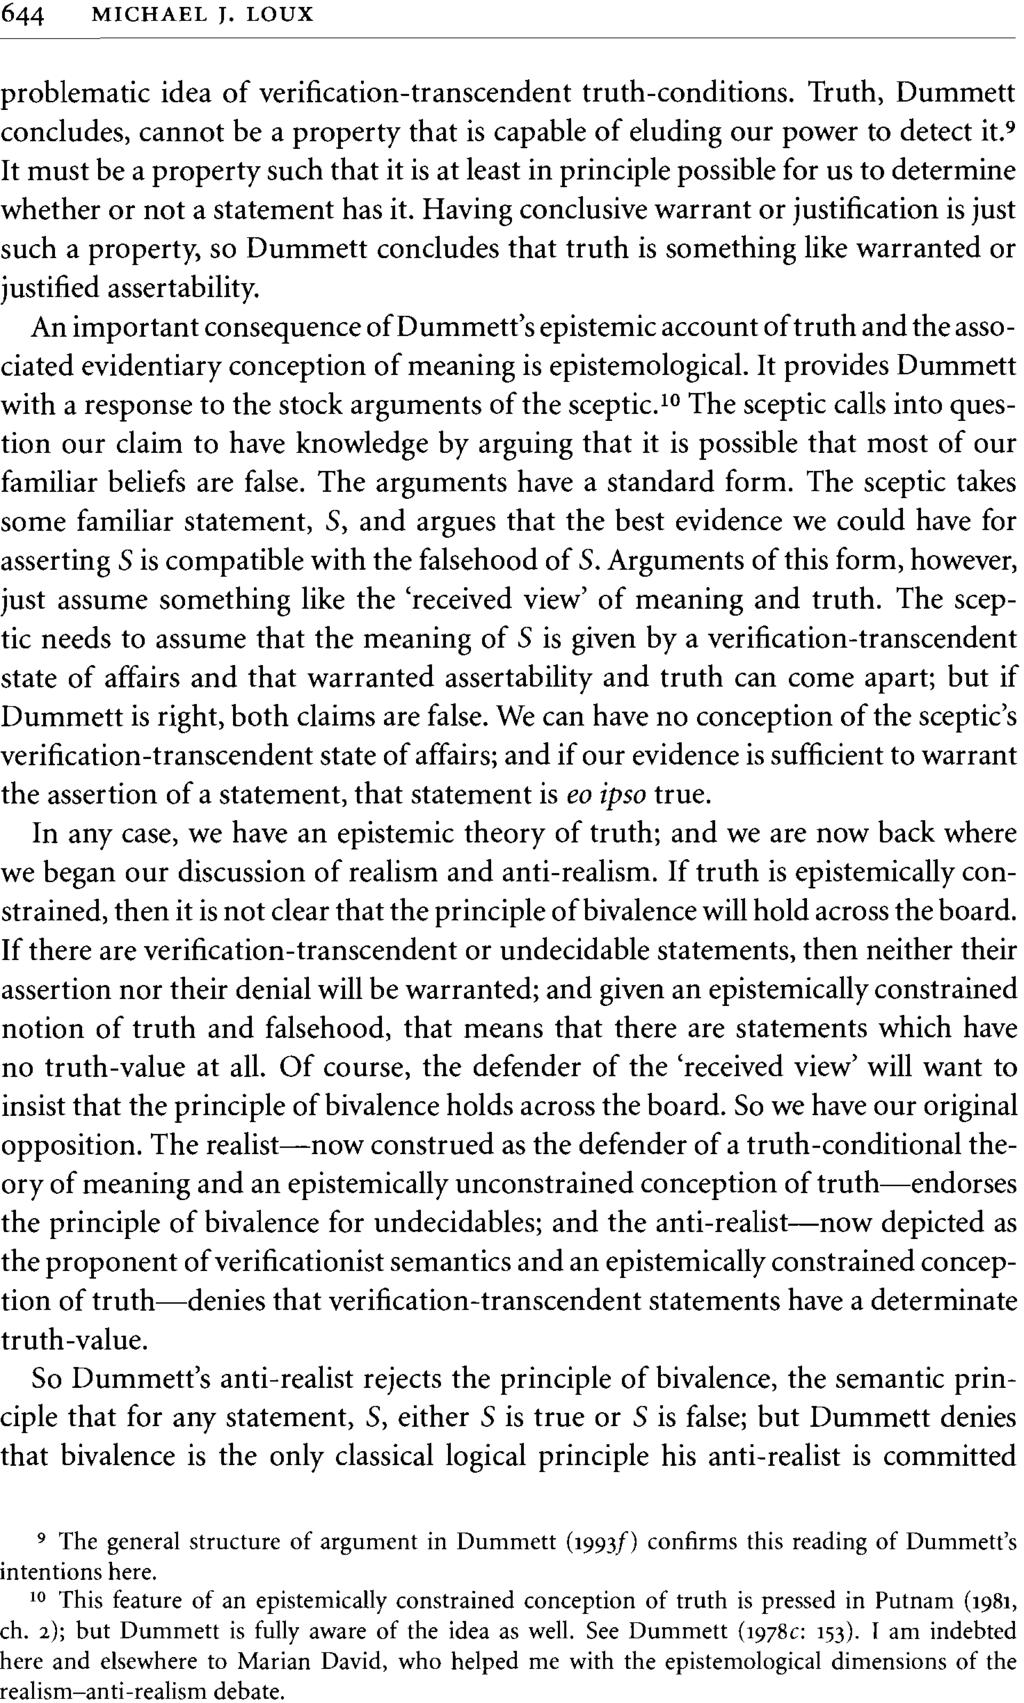 644 MICHAEL J. LOUX problematic idea of verification-transcendent truth-conditions. Truth, Dummett concludes, cannot be a property that is capable of eluding our power to detect it.